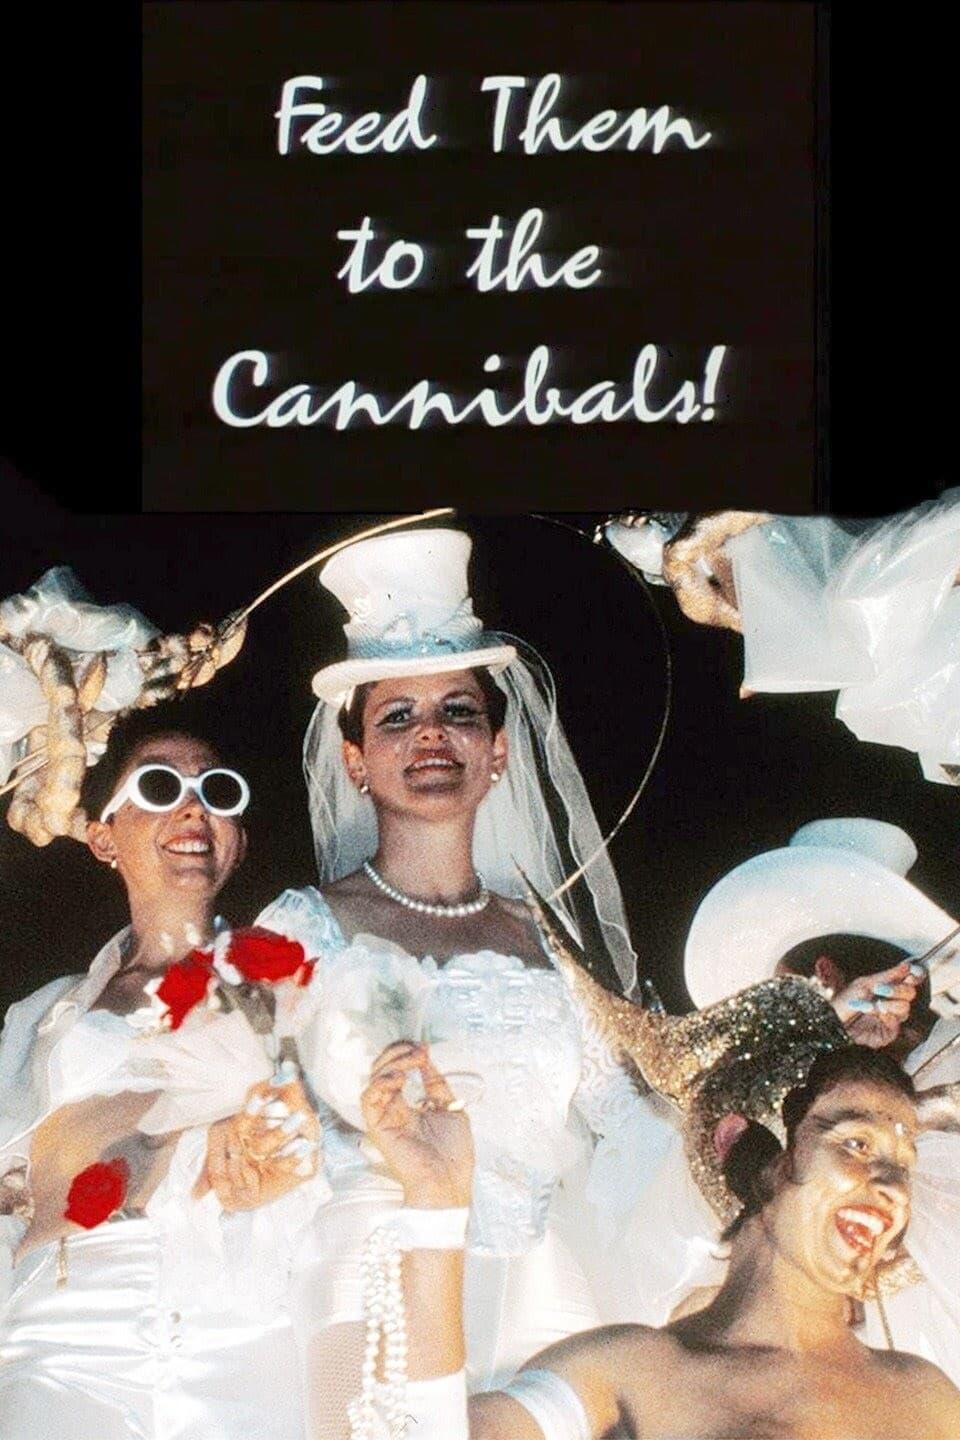 Feed Them to the Cannibals! poster